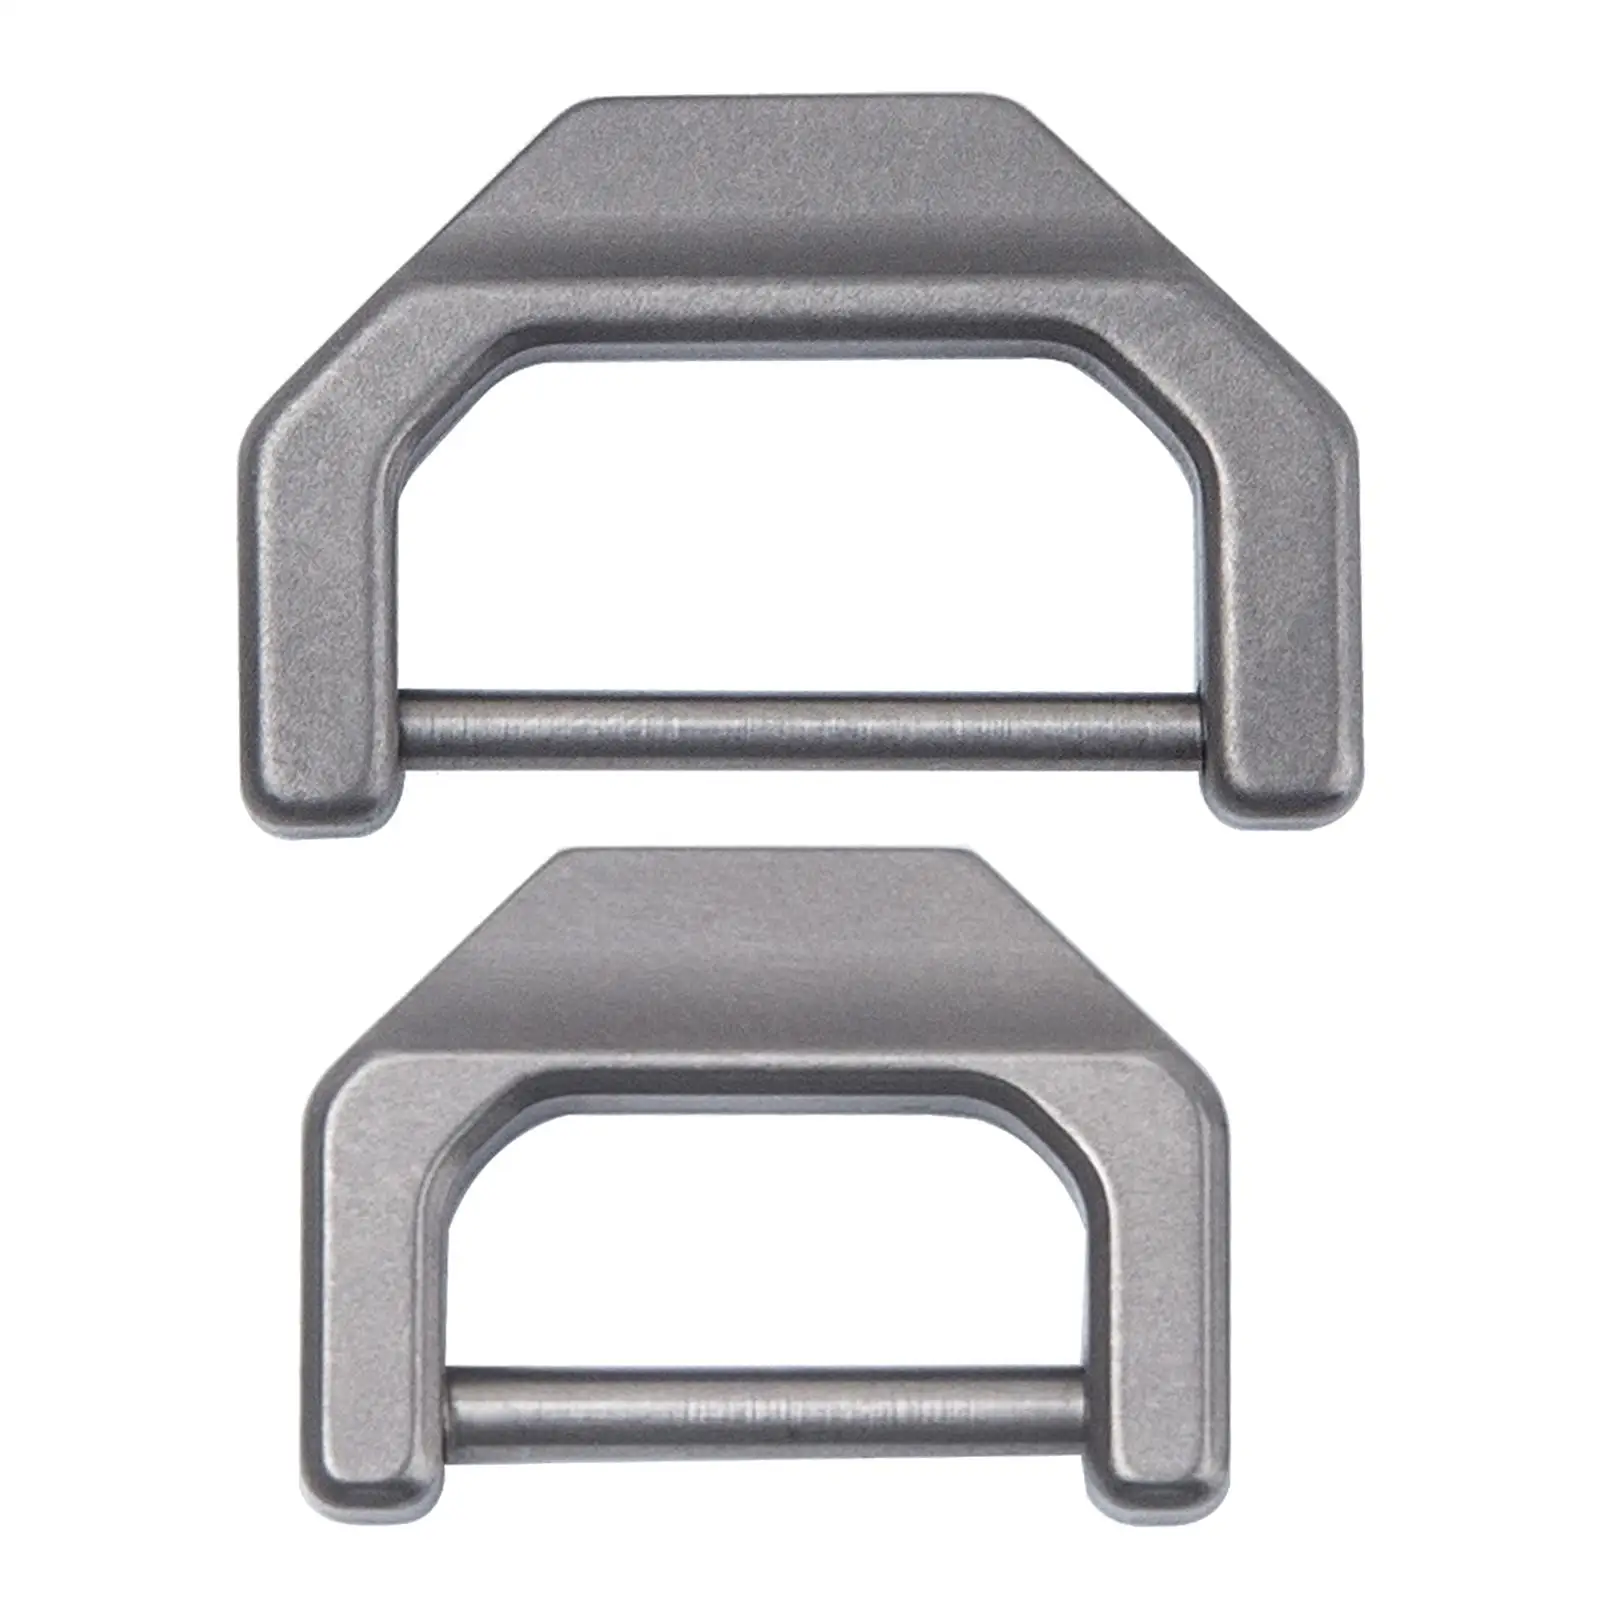 Titanium Alloy Key Ring Car Buckle Tool Keychain Buckles Shackle Small D Rings Accessories